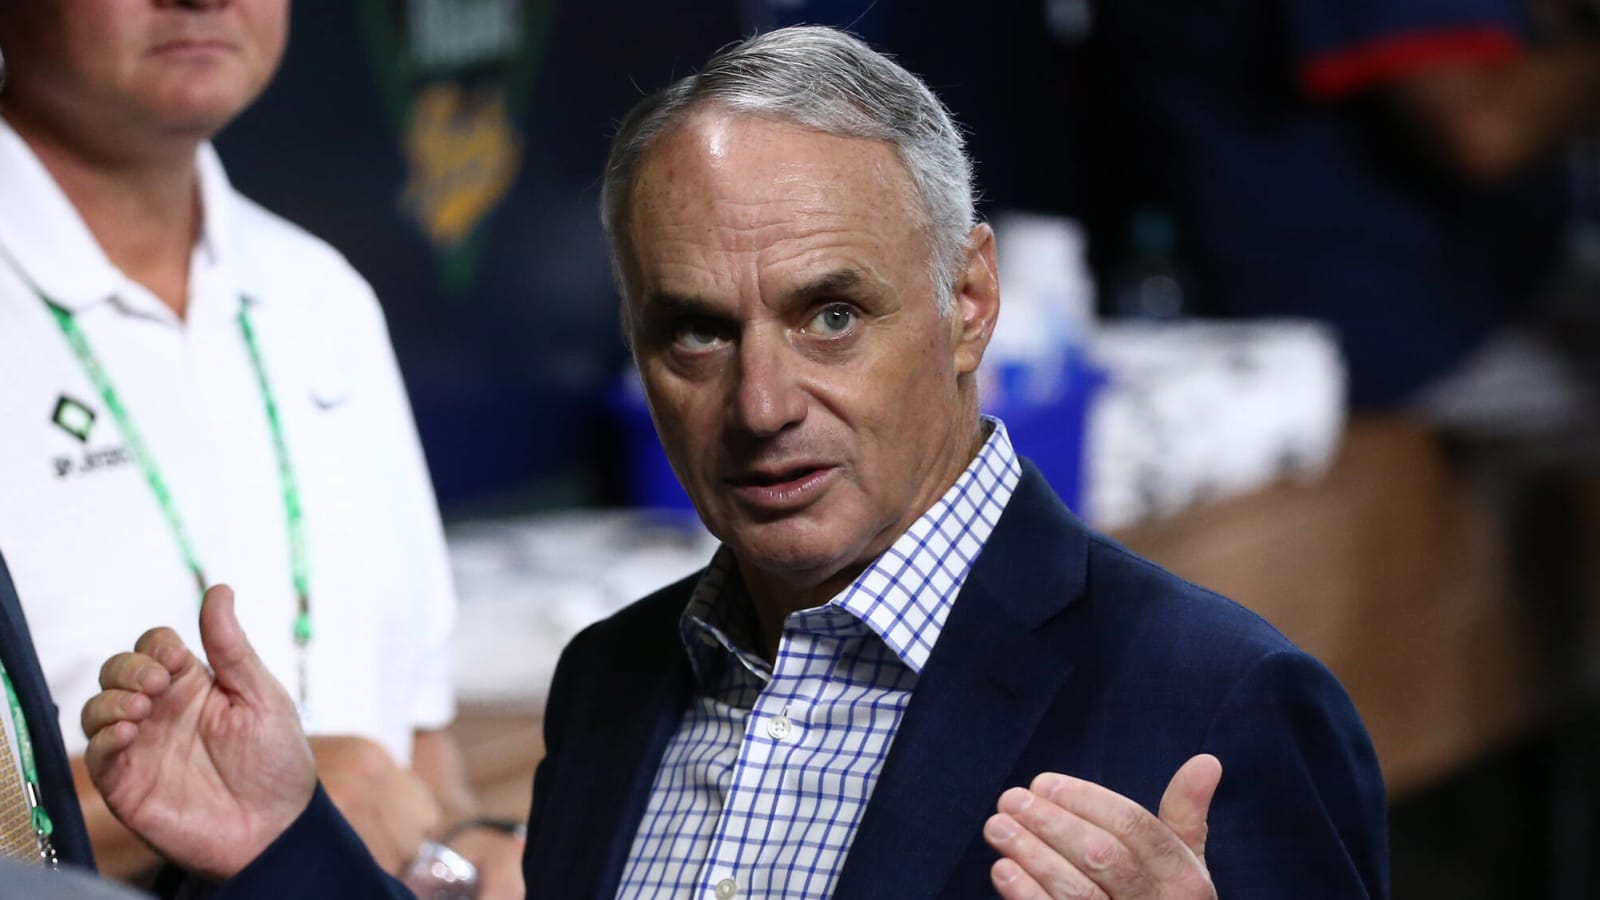 MLB pitches proposals to MLBPA to restrict sign-stealing